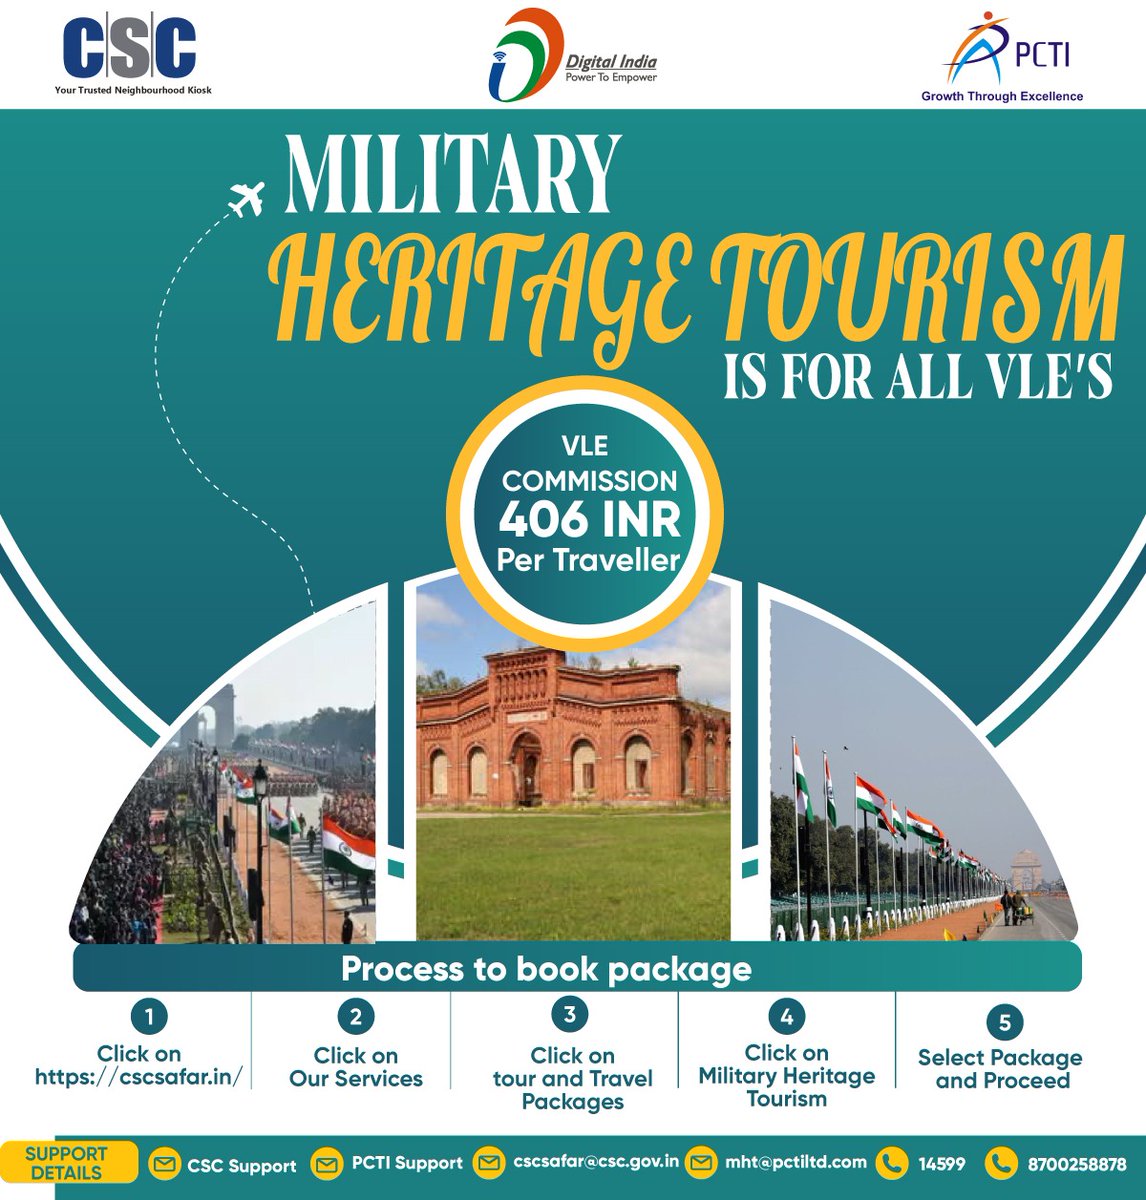 Explore India's rich and largely untapped military heritage legacy through #CSC...

Visit cscsafar.in to book a package & earn ₹406 commission per traveler.

Contact cscsafar@csc.gov.in for support.

#CSCMilitaryHeritageService #MilitaryHeritage #CSCSafarService